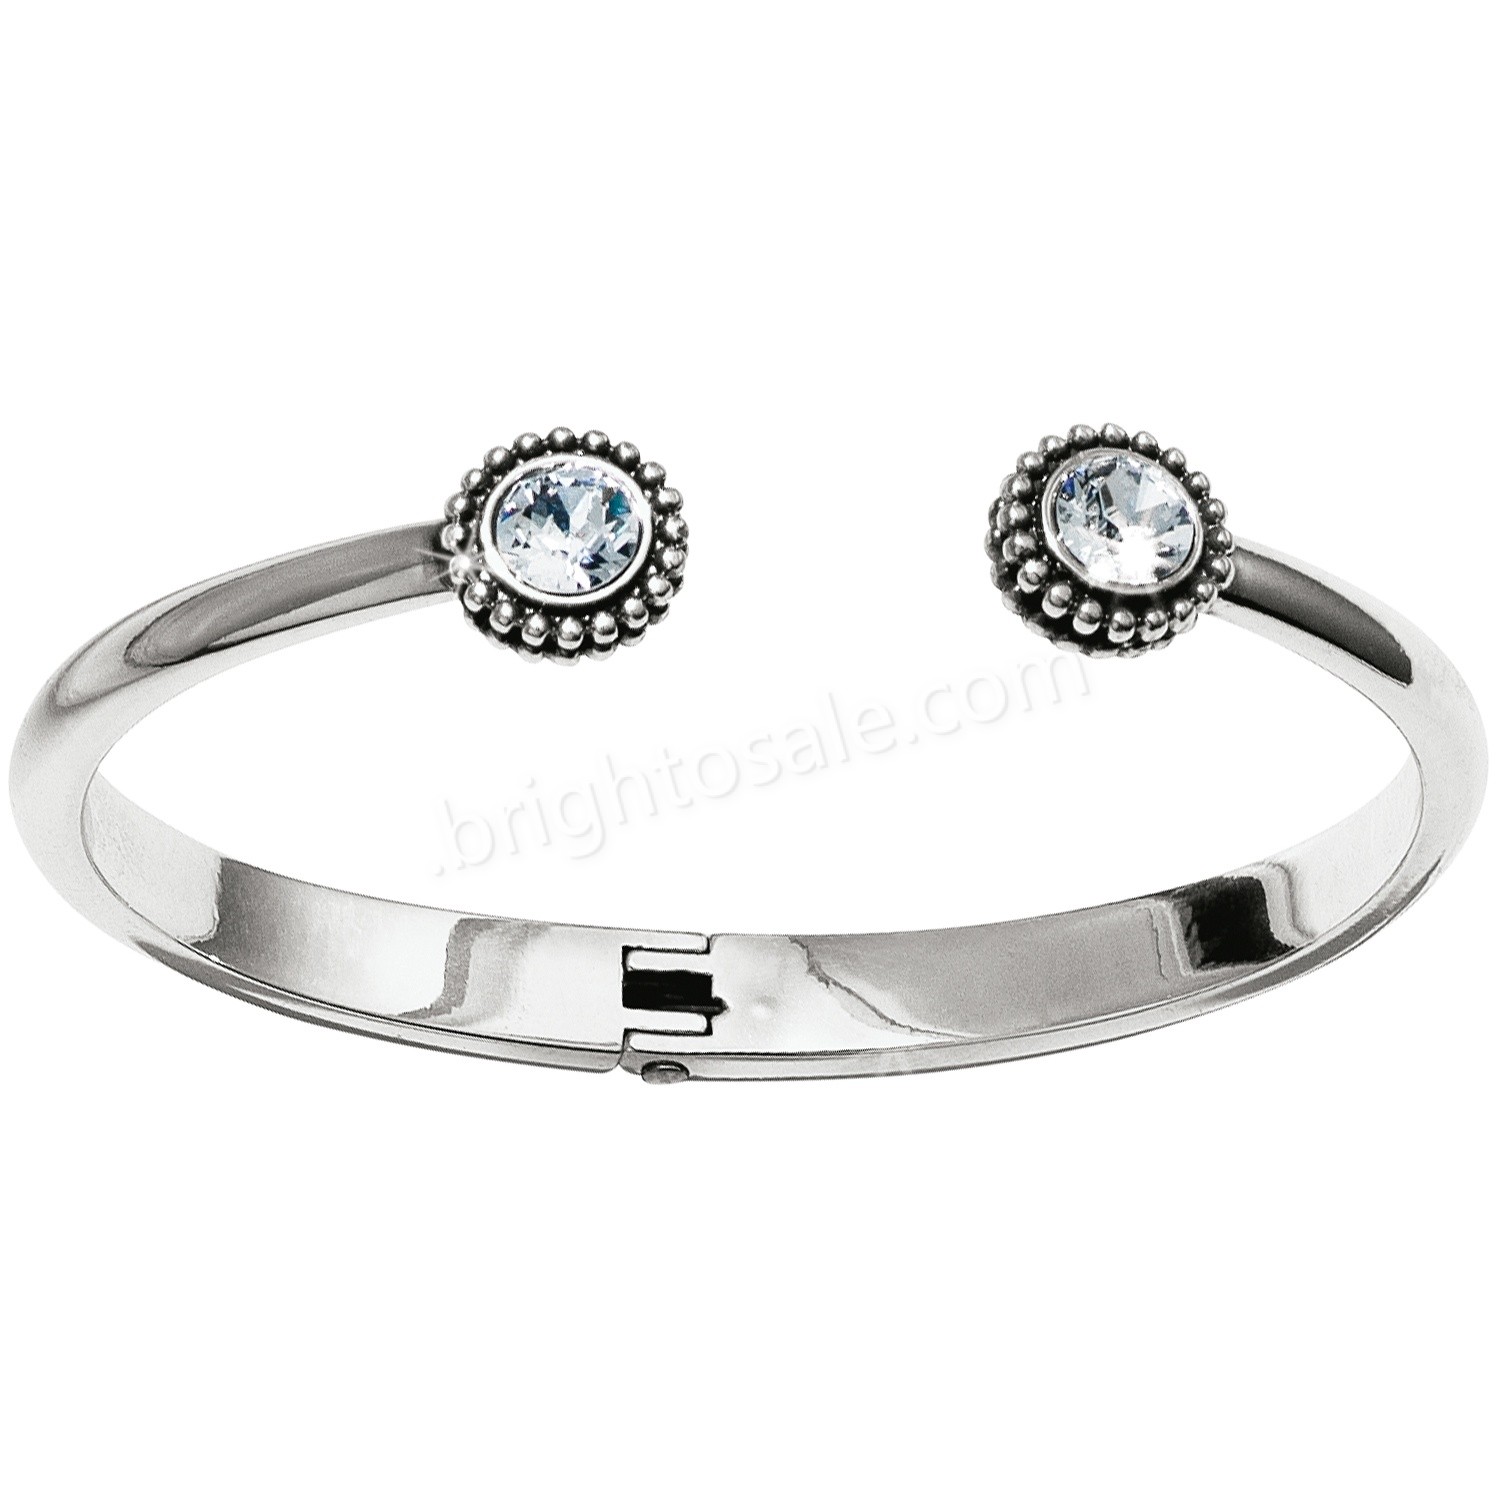 Brighton Collectibles & Online Discount Twinkle Open Hinged Bangle - Brighton Collectibles & Online Discount Twinkle Open Hinged Bangle